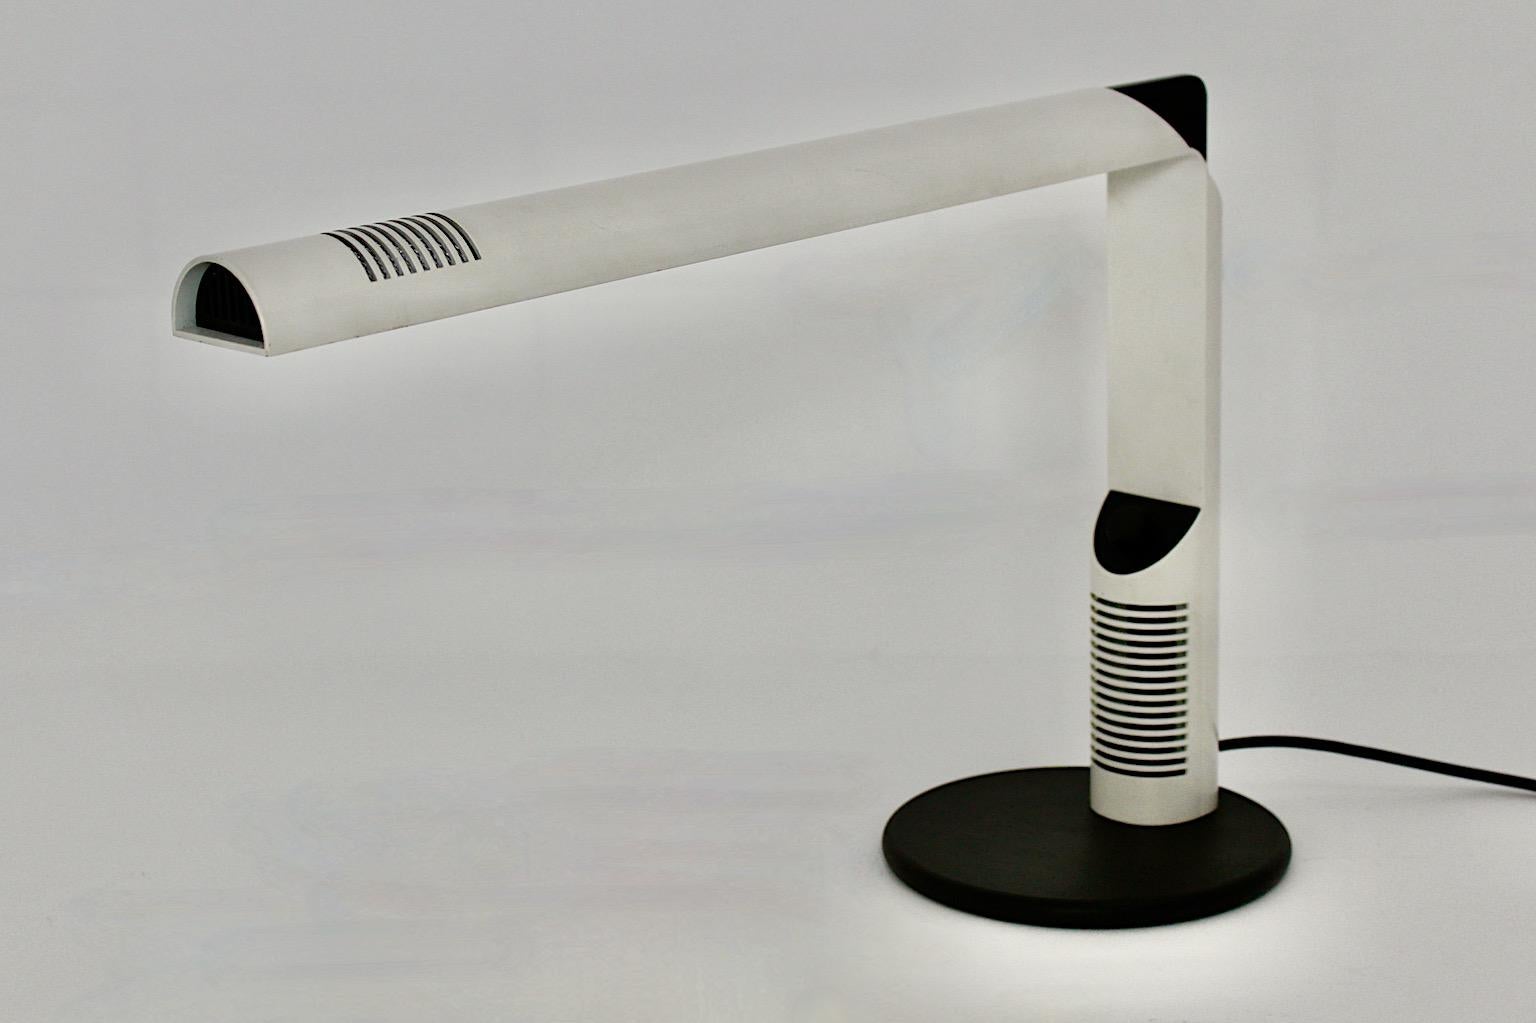 Space Age vintage white table lamp or desk lamp model Abele from white lacquered metal by Gianfranco Frattini for Luci Milan 1979.
The table lamp shows white lacquered metal stem with a black rubber base, black plastic parts and an aluminum